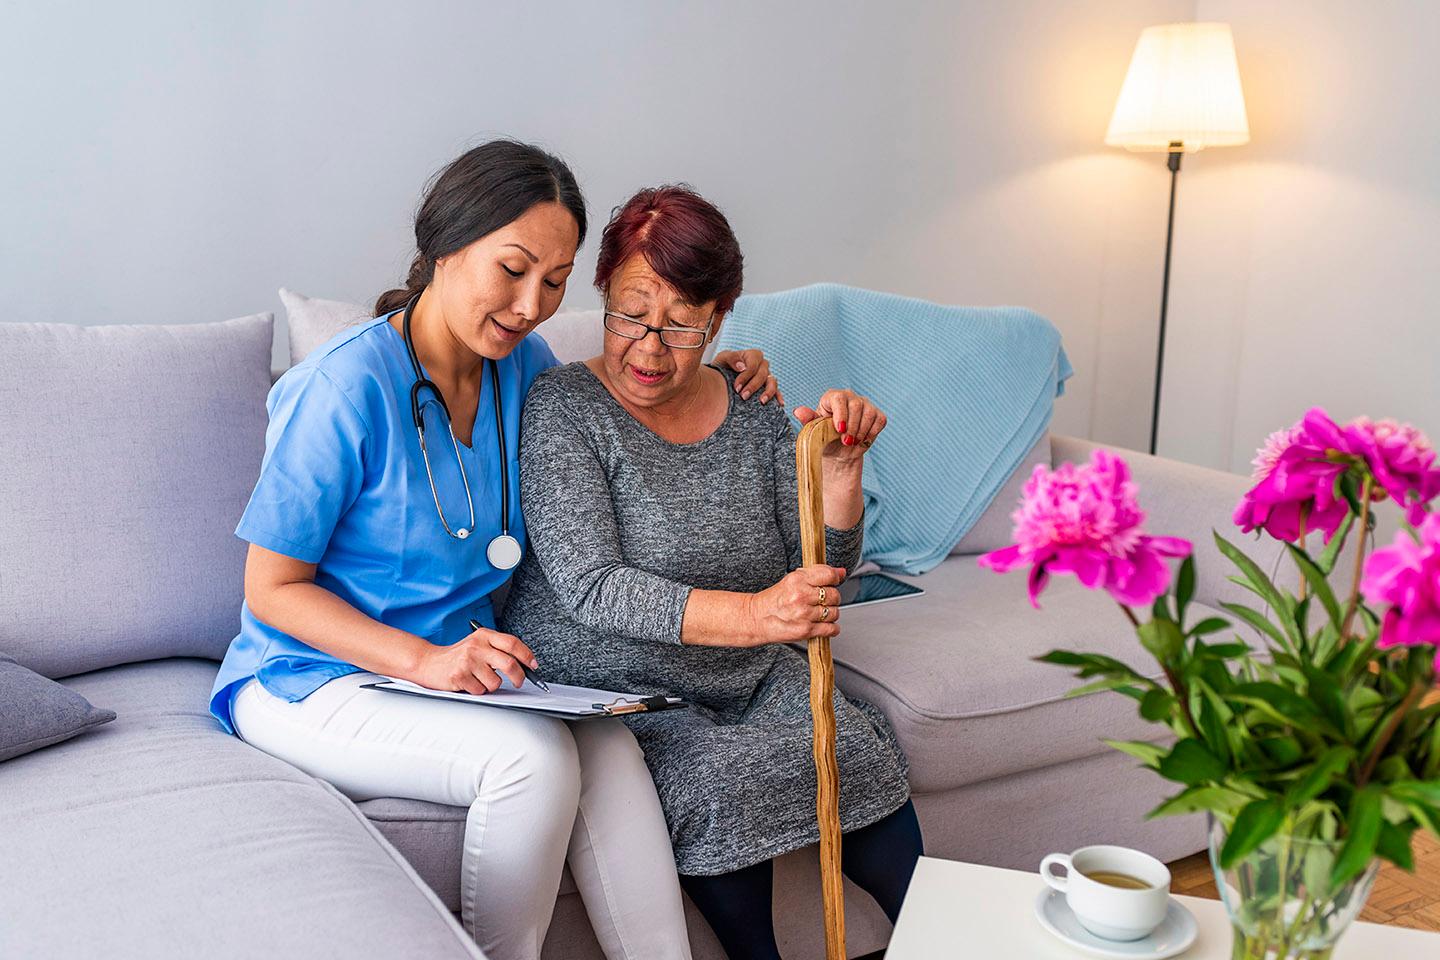 Are You Aware of the Support Available from PACE to Help You Age in Your Home?